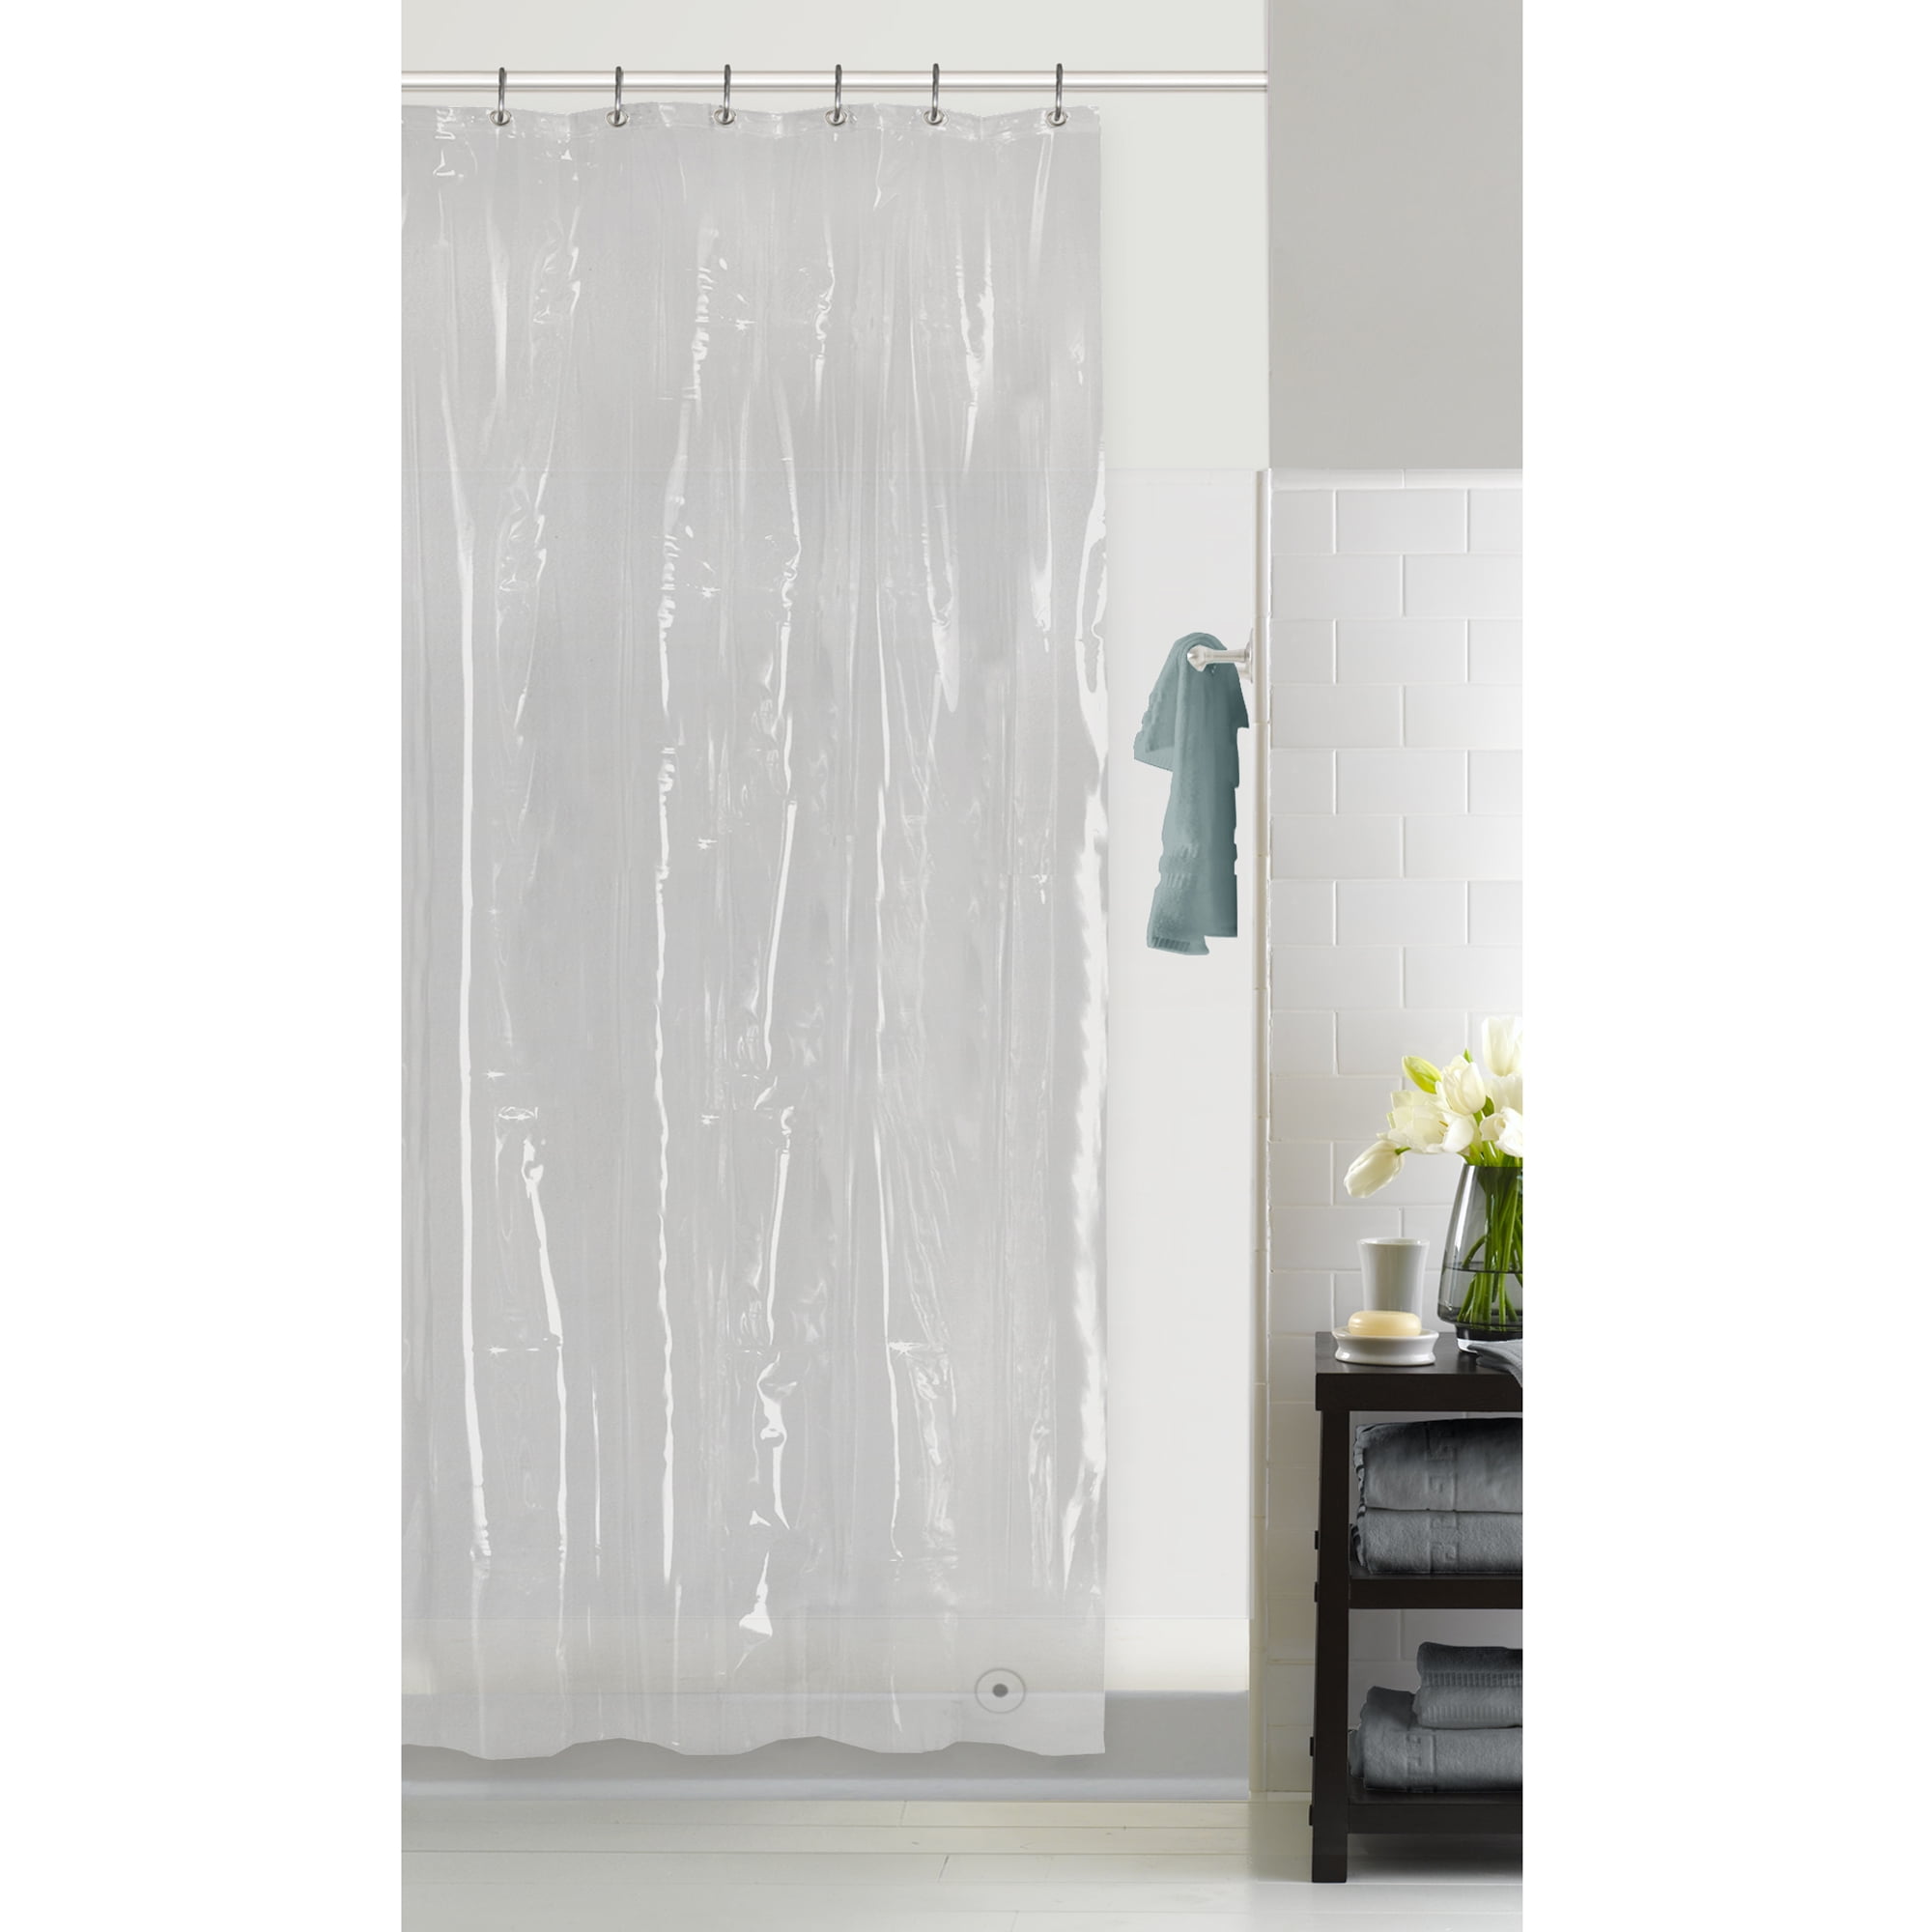 2 Pack mDesign STALL SIZE Waterproof Vinyl Shower Curtain Liner Frost 54x78" 